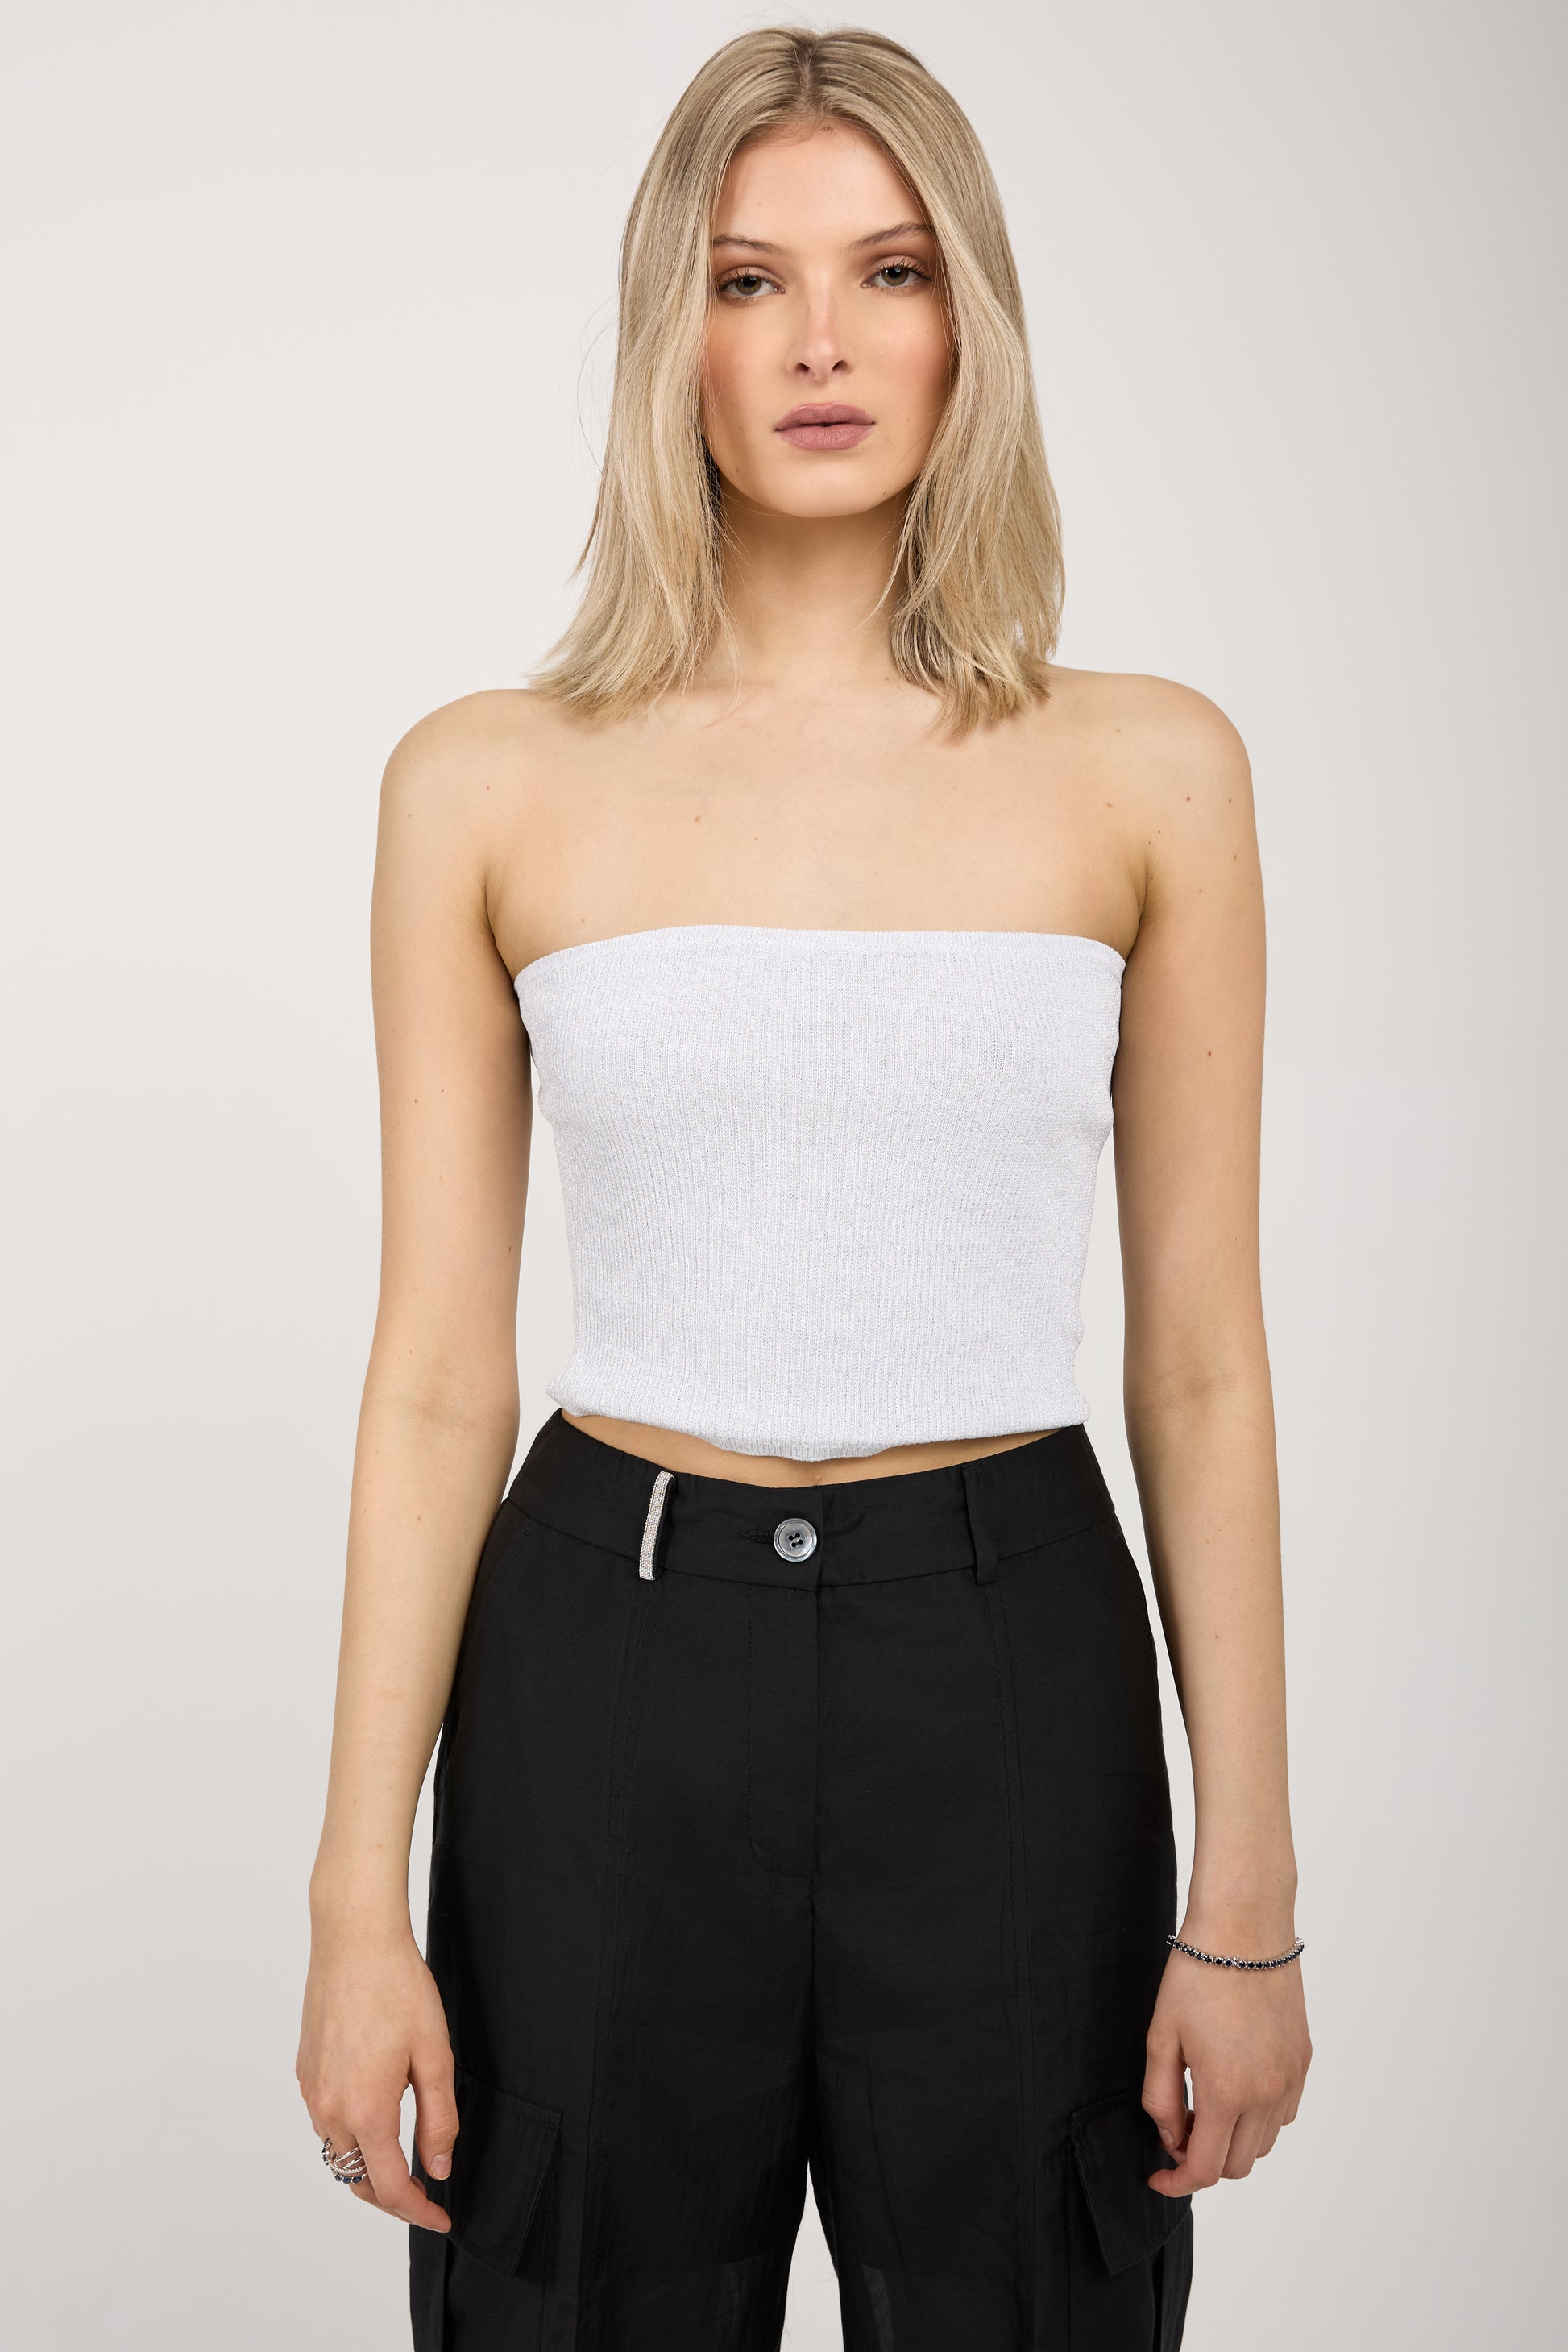 PESERICO Cotton Knit Bustier Top in White with Silver Lurex